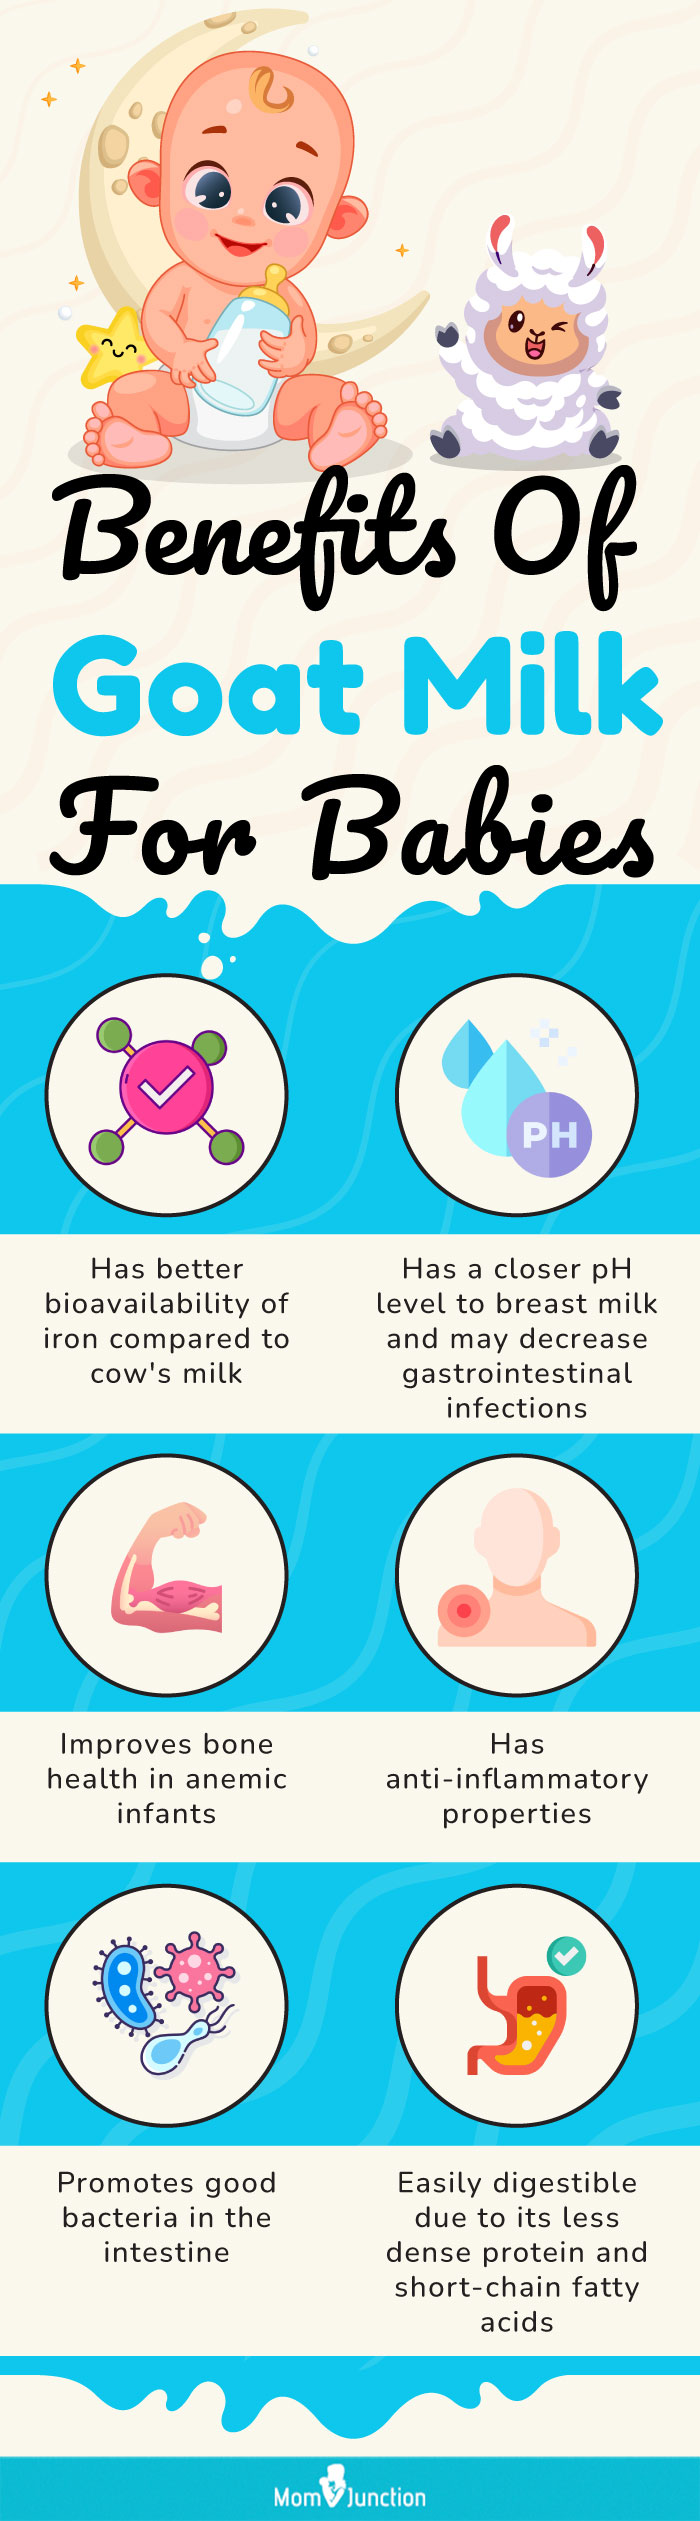 benefits of goat milk for babies [infographic]